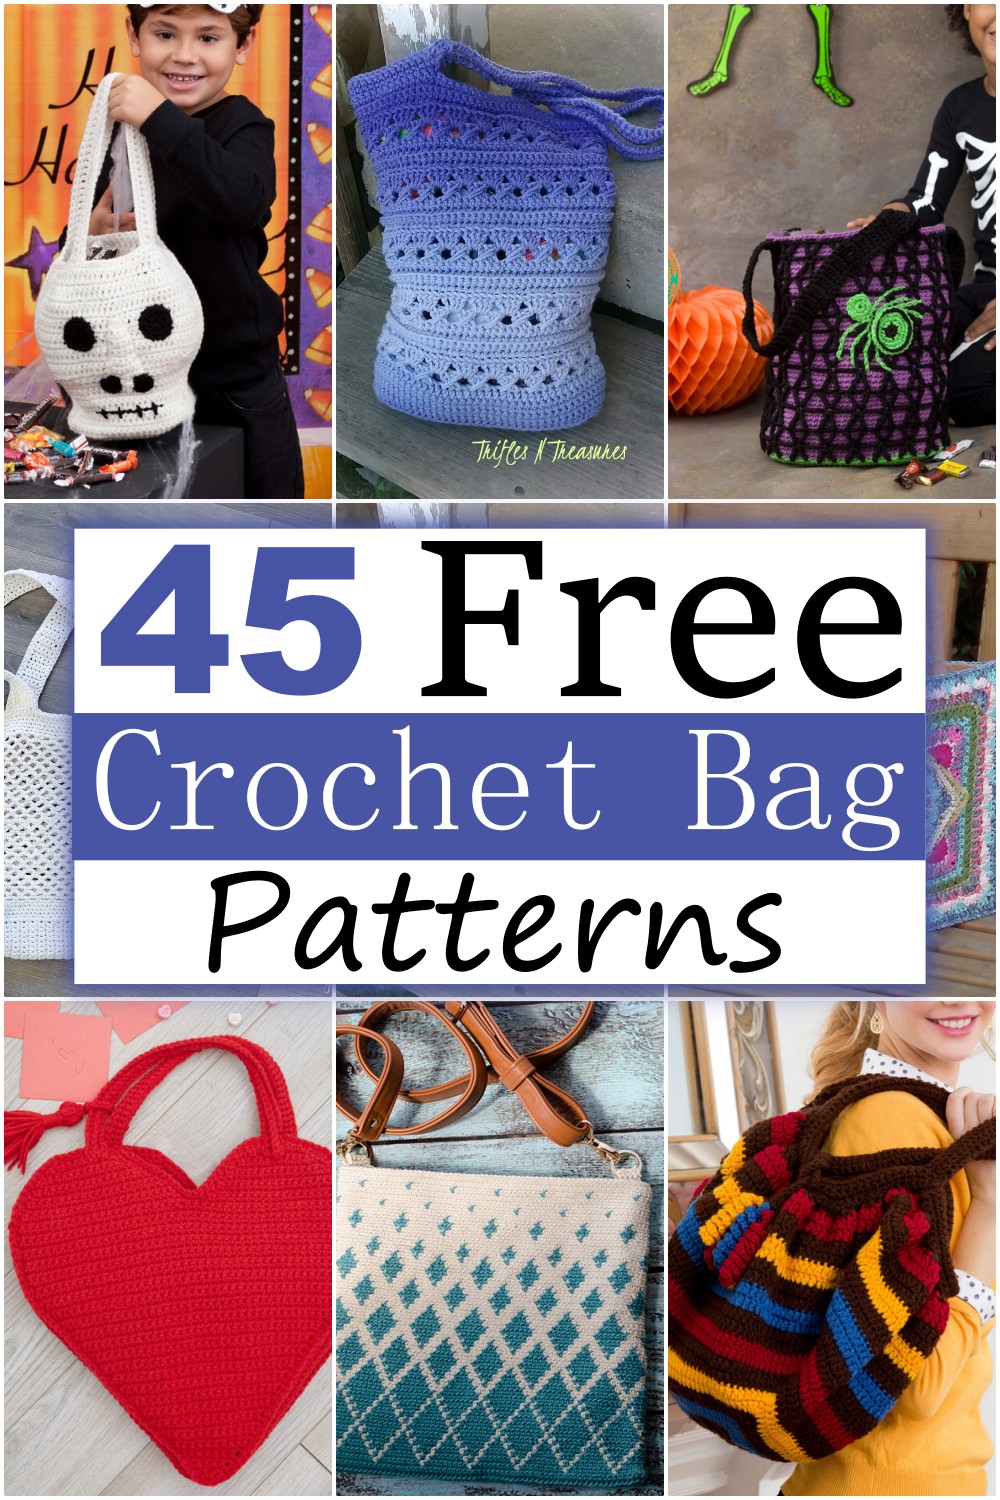 45 Free Crochet Bag Patterns Of All Kinds